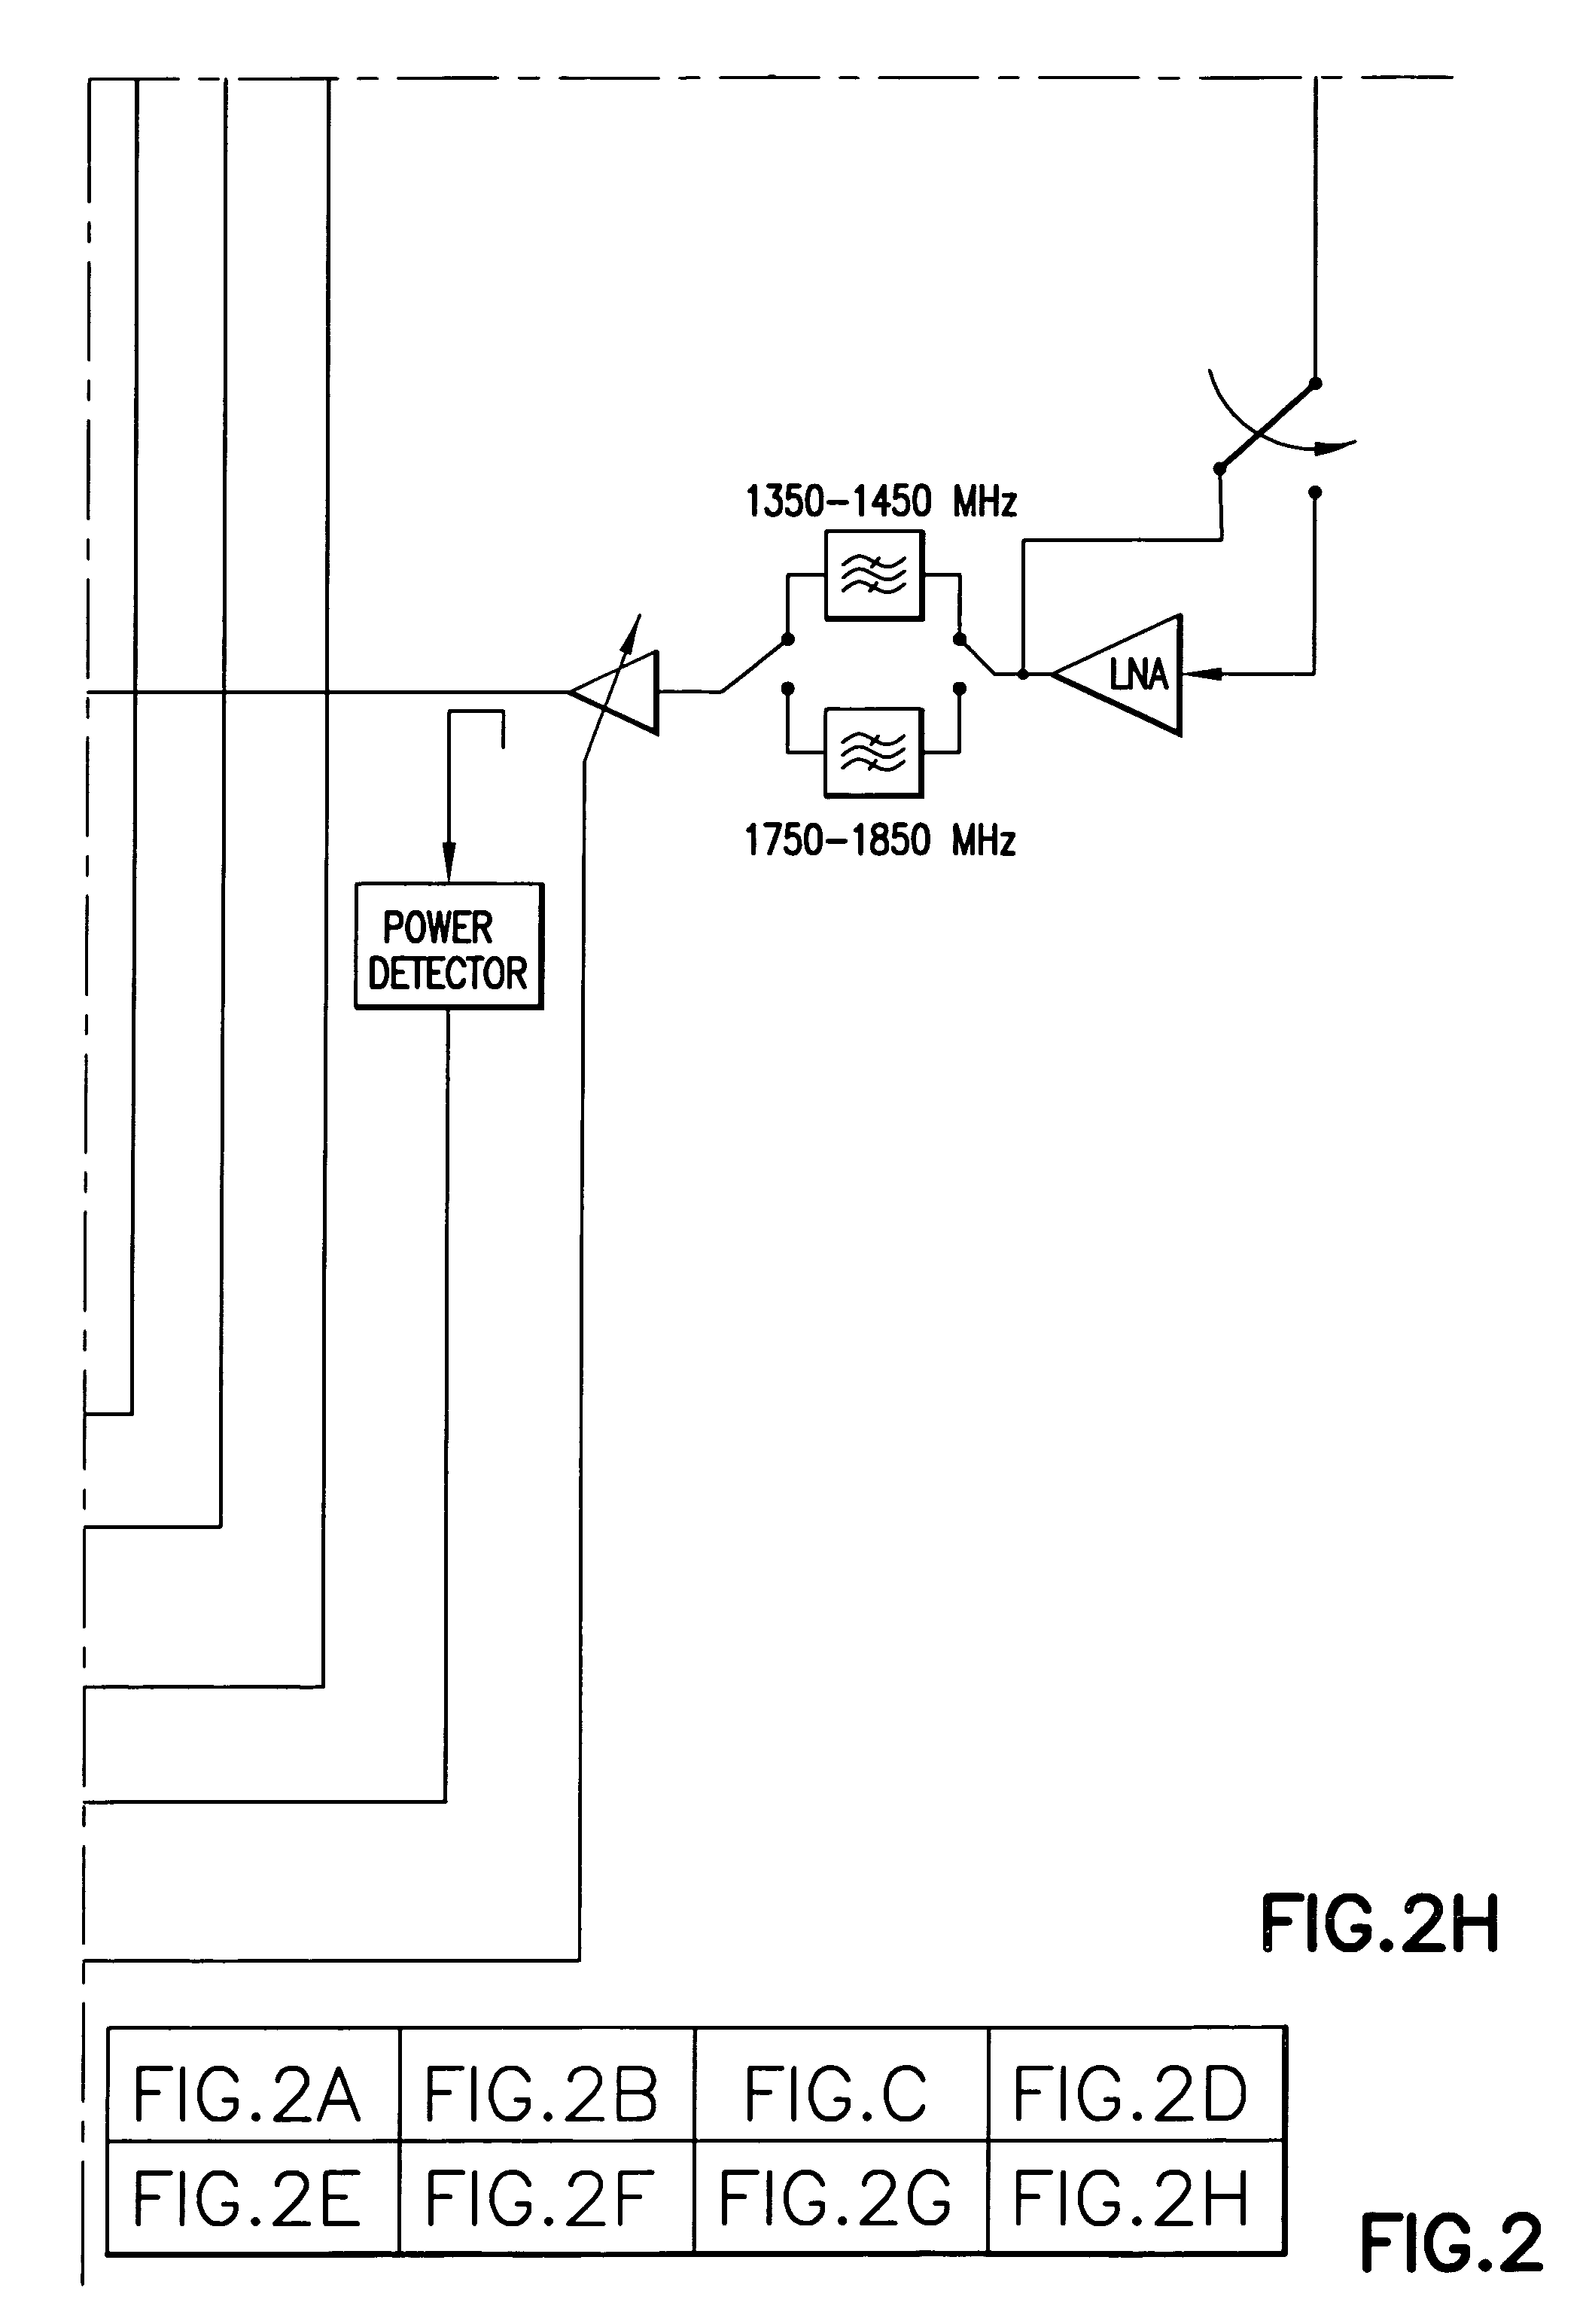 Non-coherent multiuser receiver and method for aiding carrier acquisition in a spread spectrum system